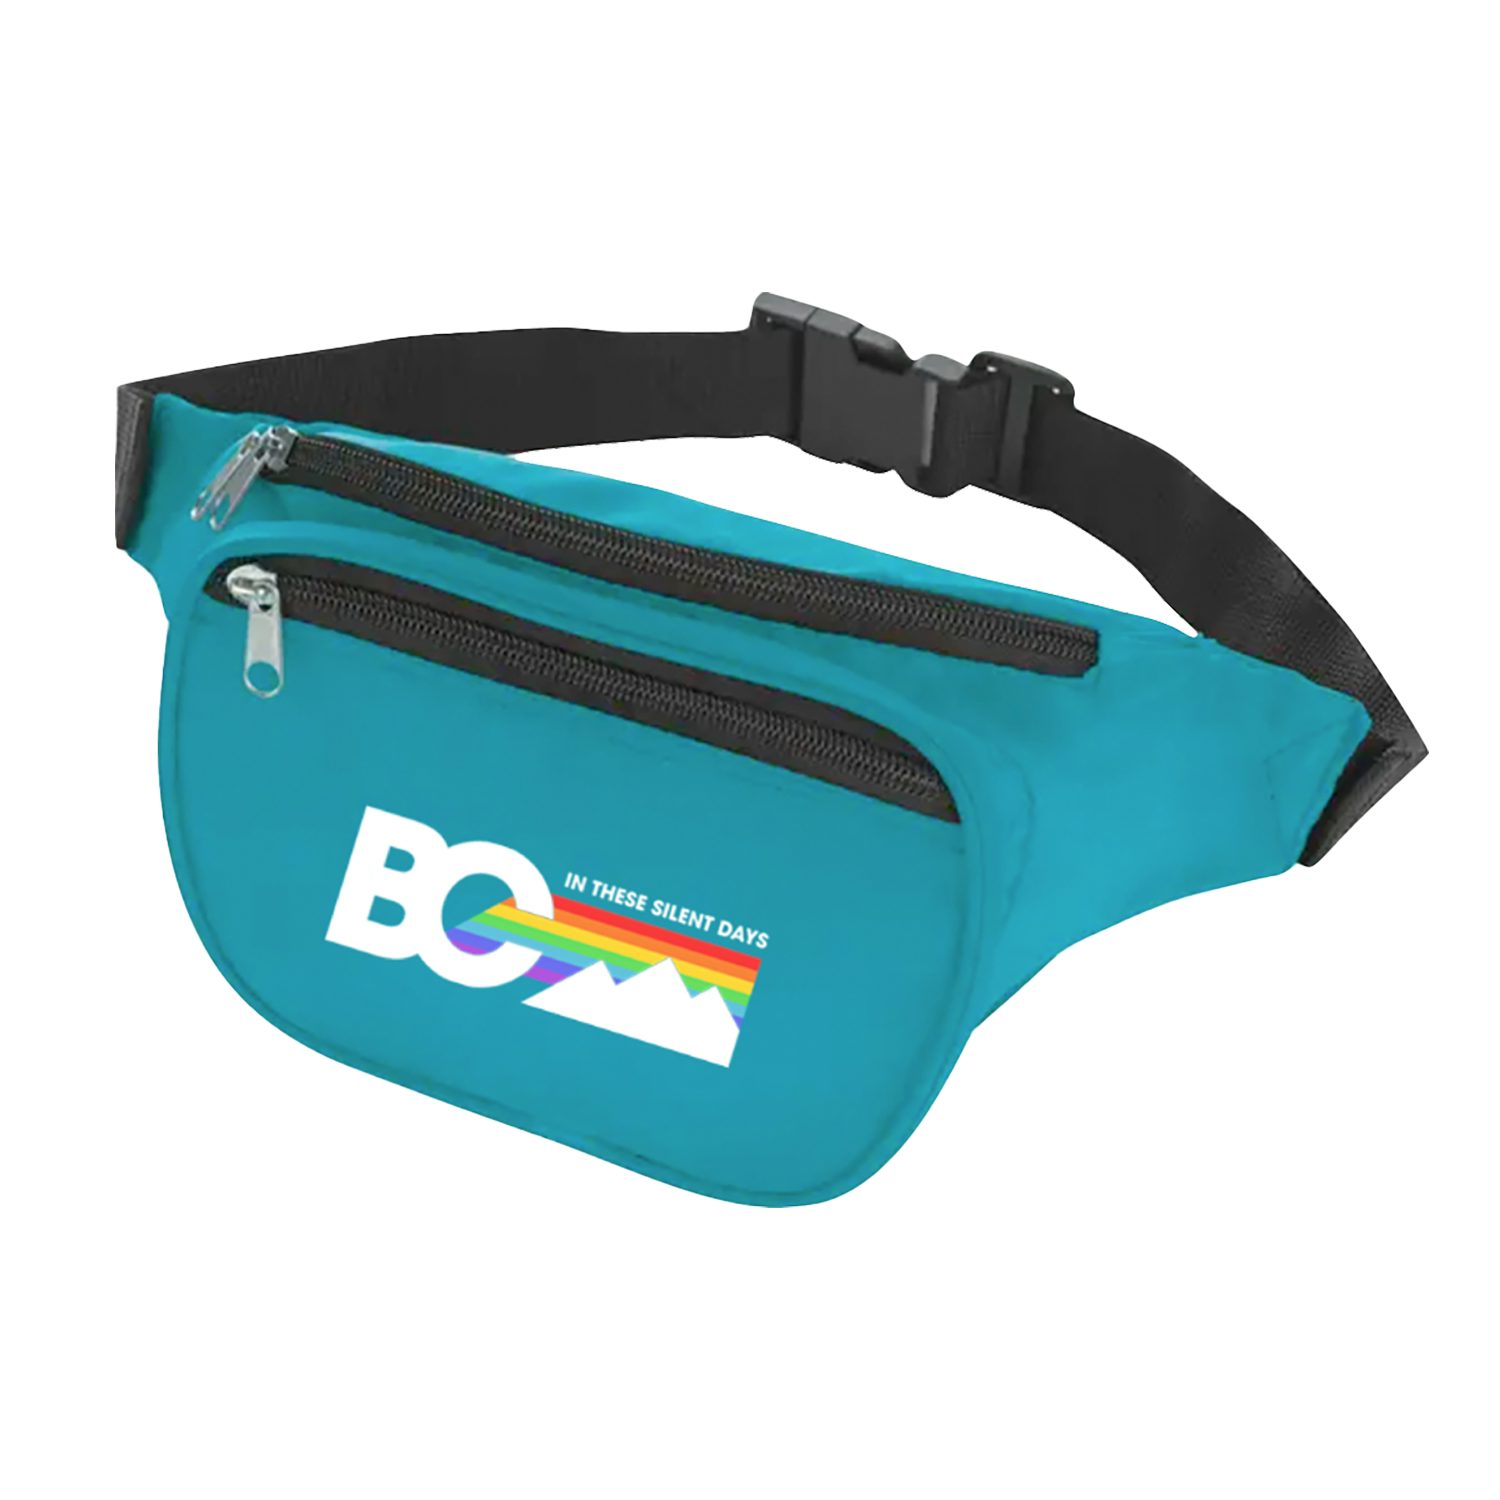 Brandi Carlile In These Silent Days Mountain Fanny Pack